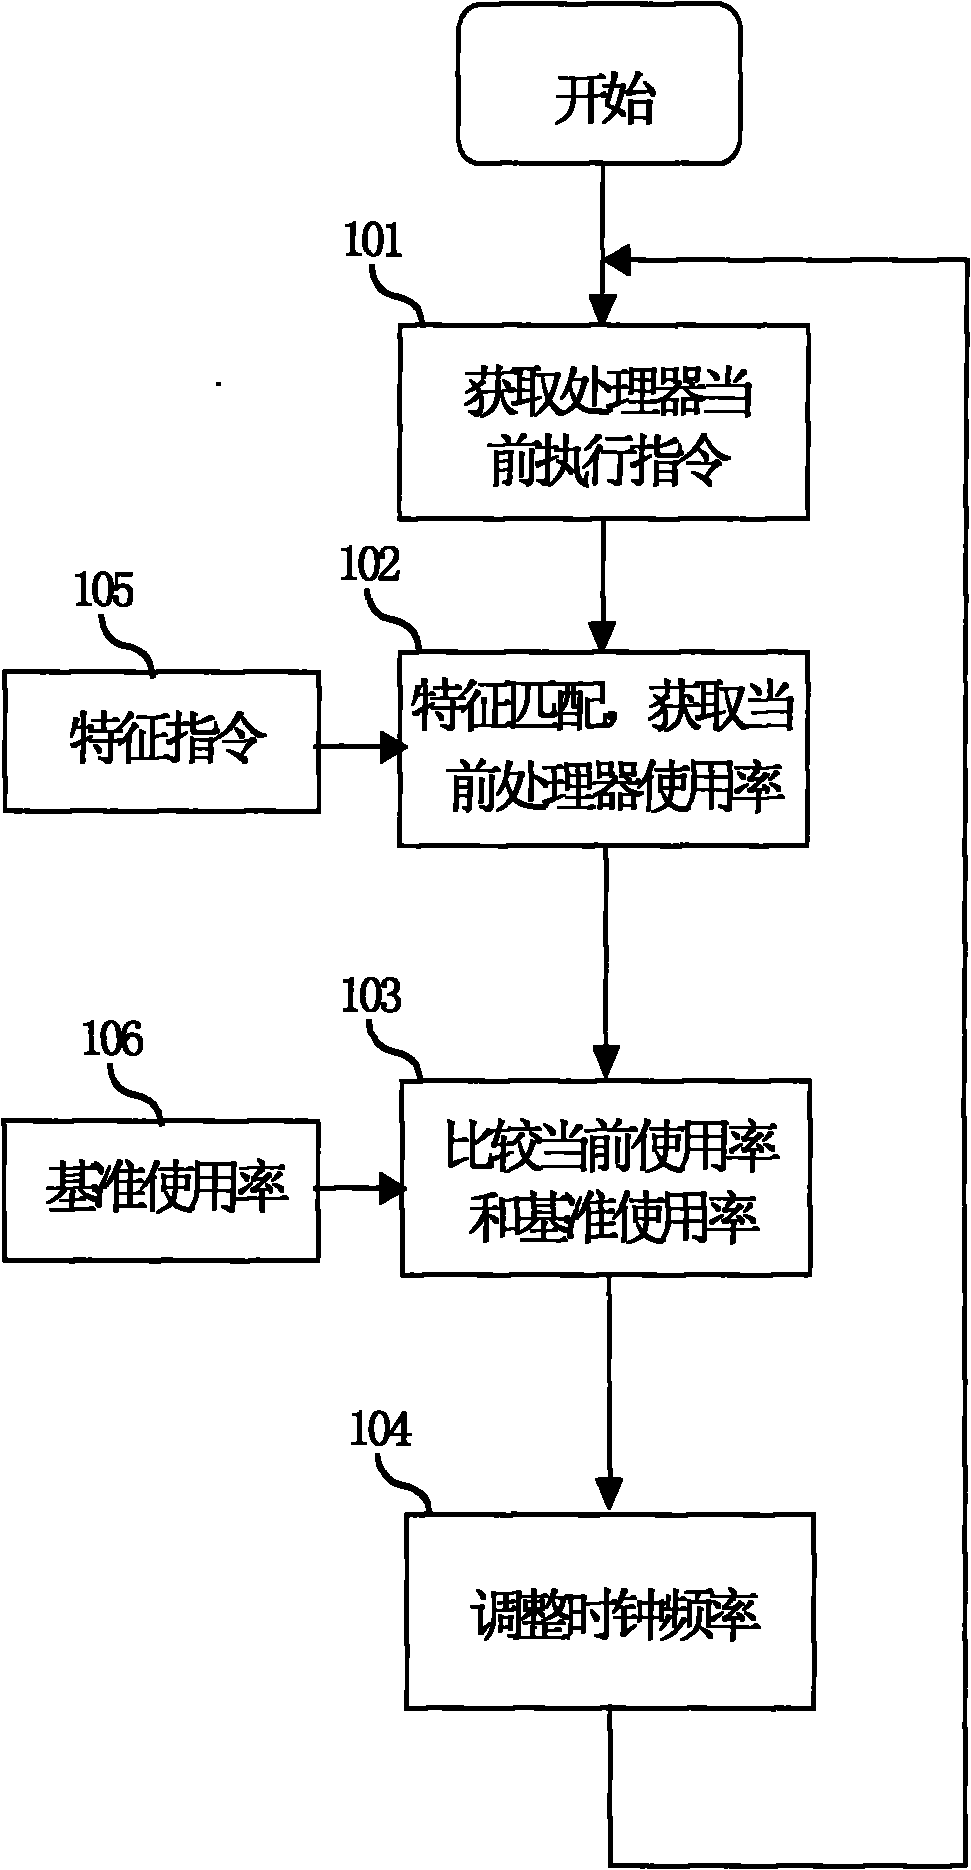 Method and device for automatically adjusting clock frequency of system in real time